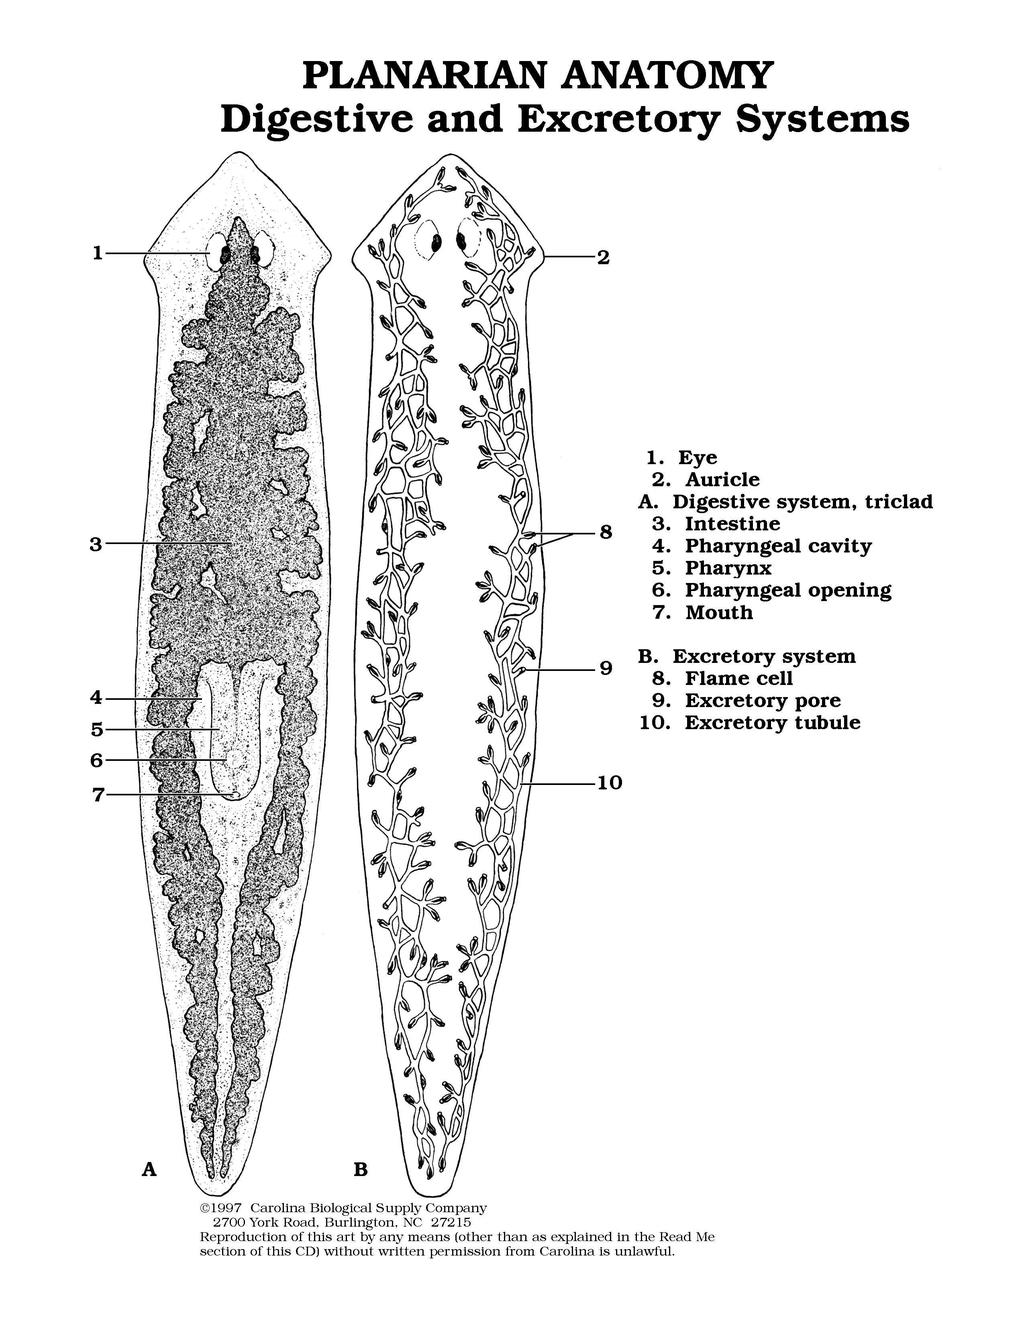 The class Trematoda is represented by many parasites such as the human liver fluke (Clonorchis sinensis) and the sheep liver fluke (Fasciola hepatica).